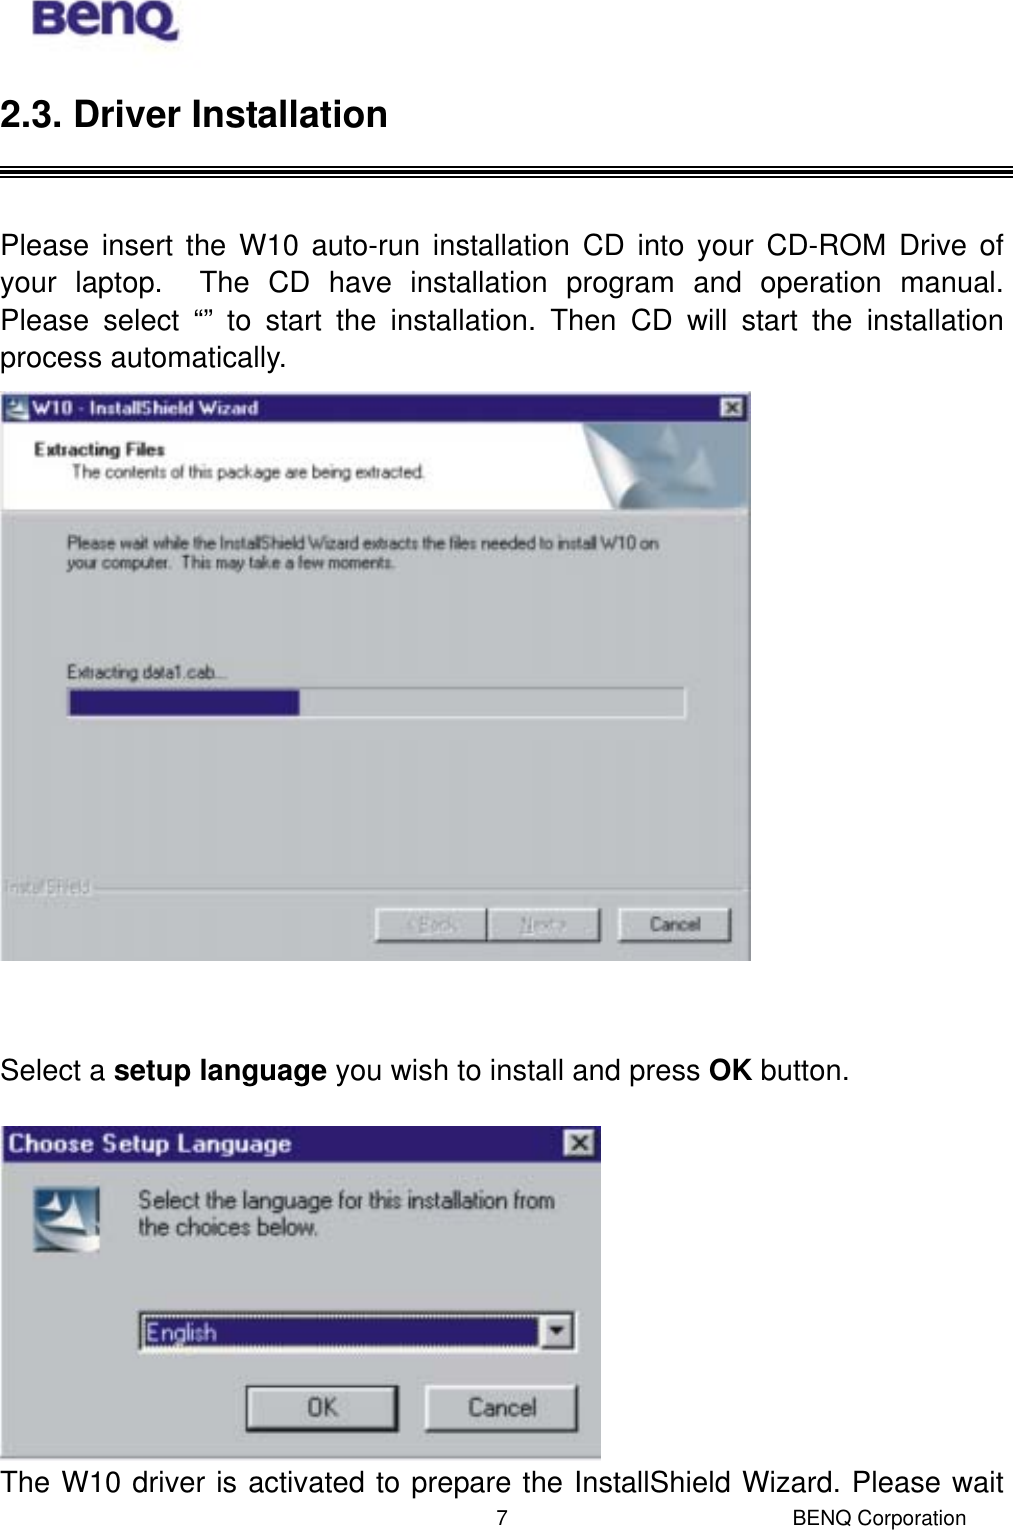  BENQ Corporation 72.3. Driver Installation   Please insert the W10 auto-run installation CD into your CD-ROM Drive of your laptop.  The CD have installation program and operation manual.  Please select “” to start the installation. Then CD will start the installation process automatically.    Select a setup language you wish to install and press OK button.   The W10 driver is activated to prepare the InstallShield Wizard. Please wait 